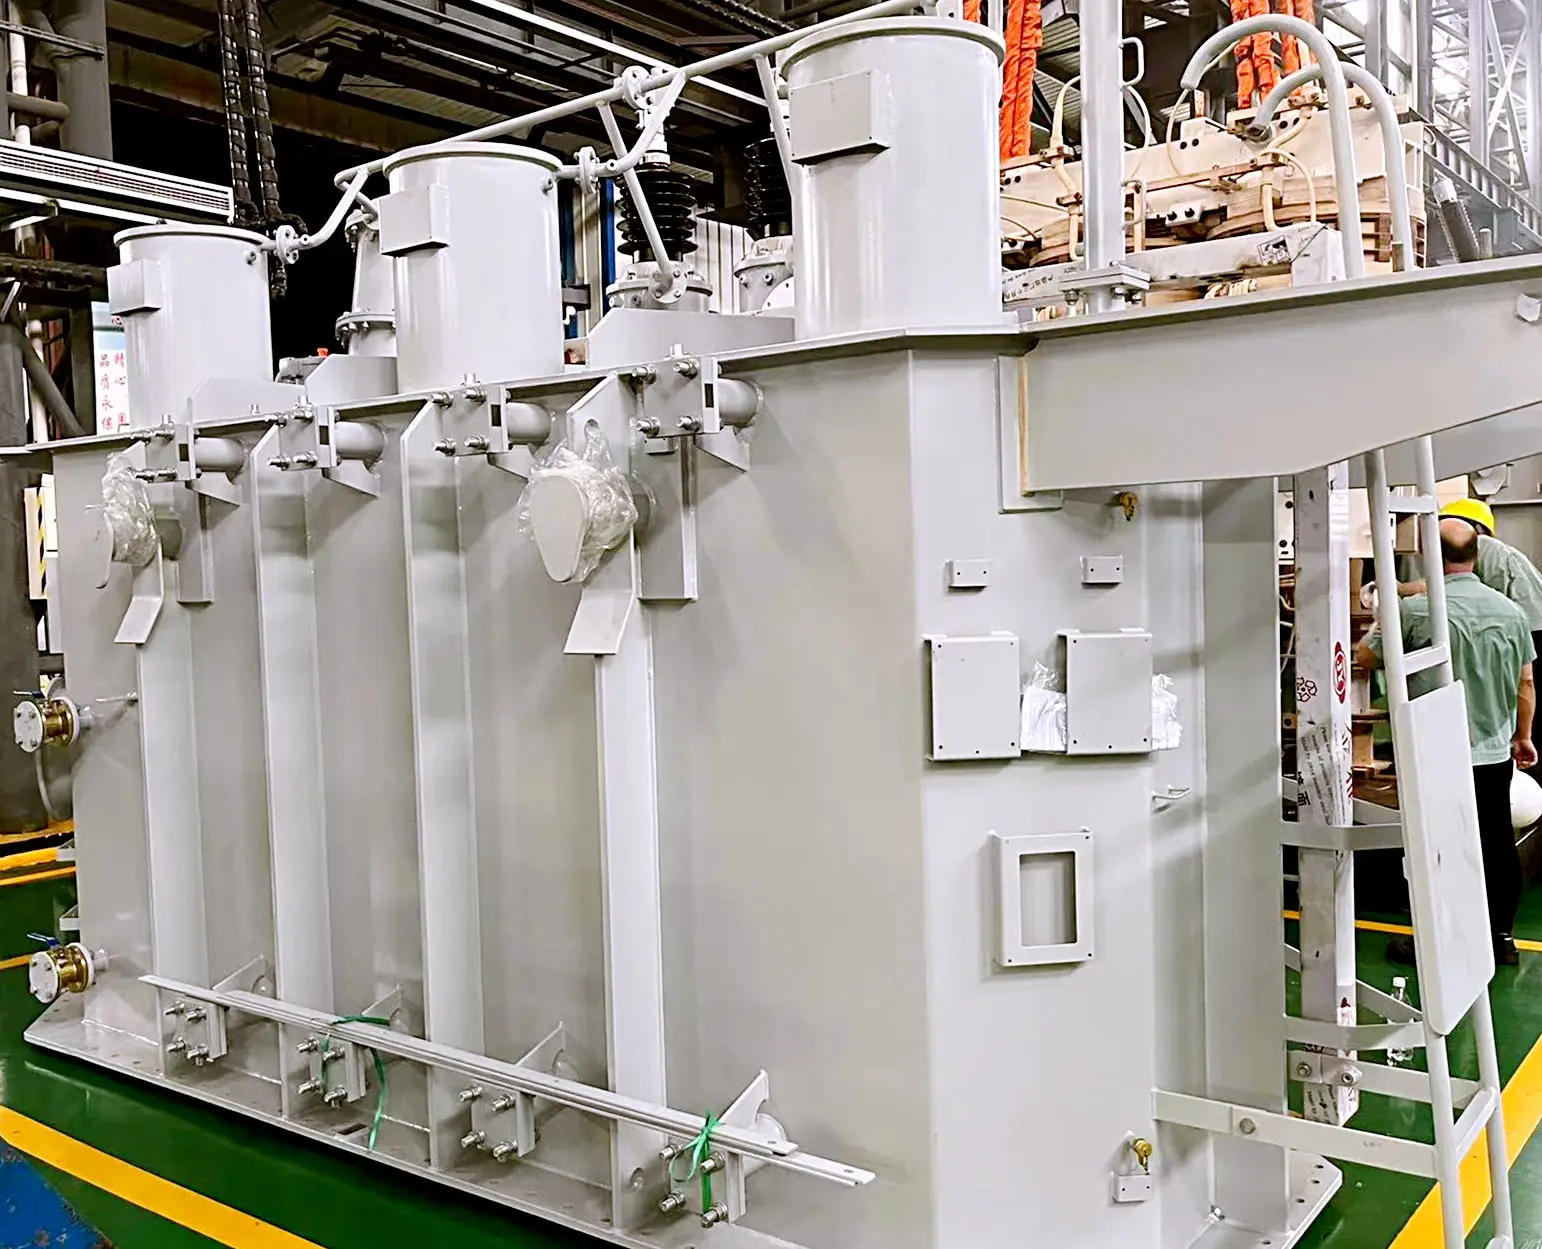 Hot Sales TransformerFactory direct price 110 kv 16mva copper oil immersed power transformer Electrical Equipment